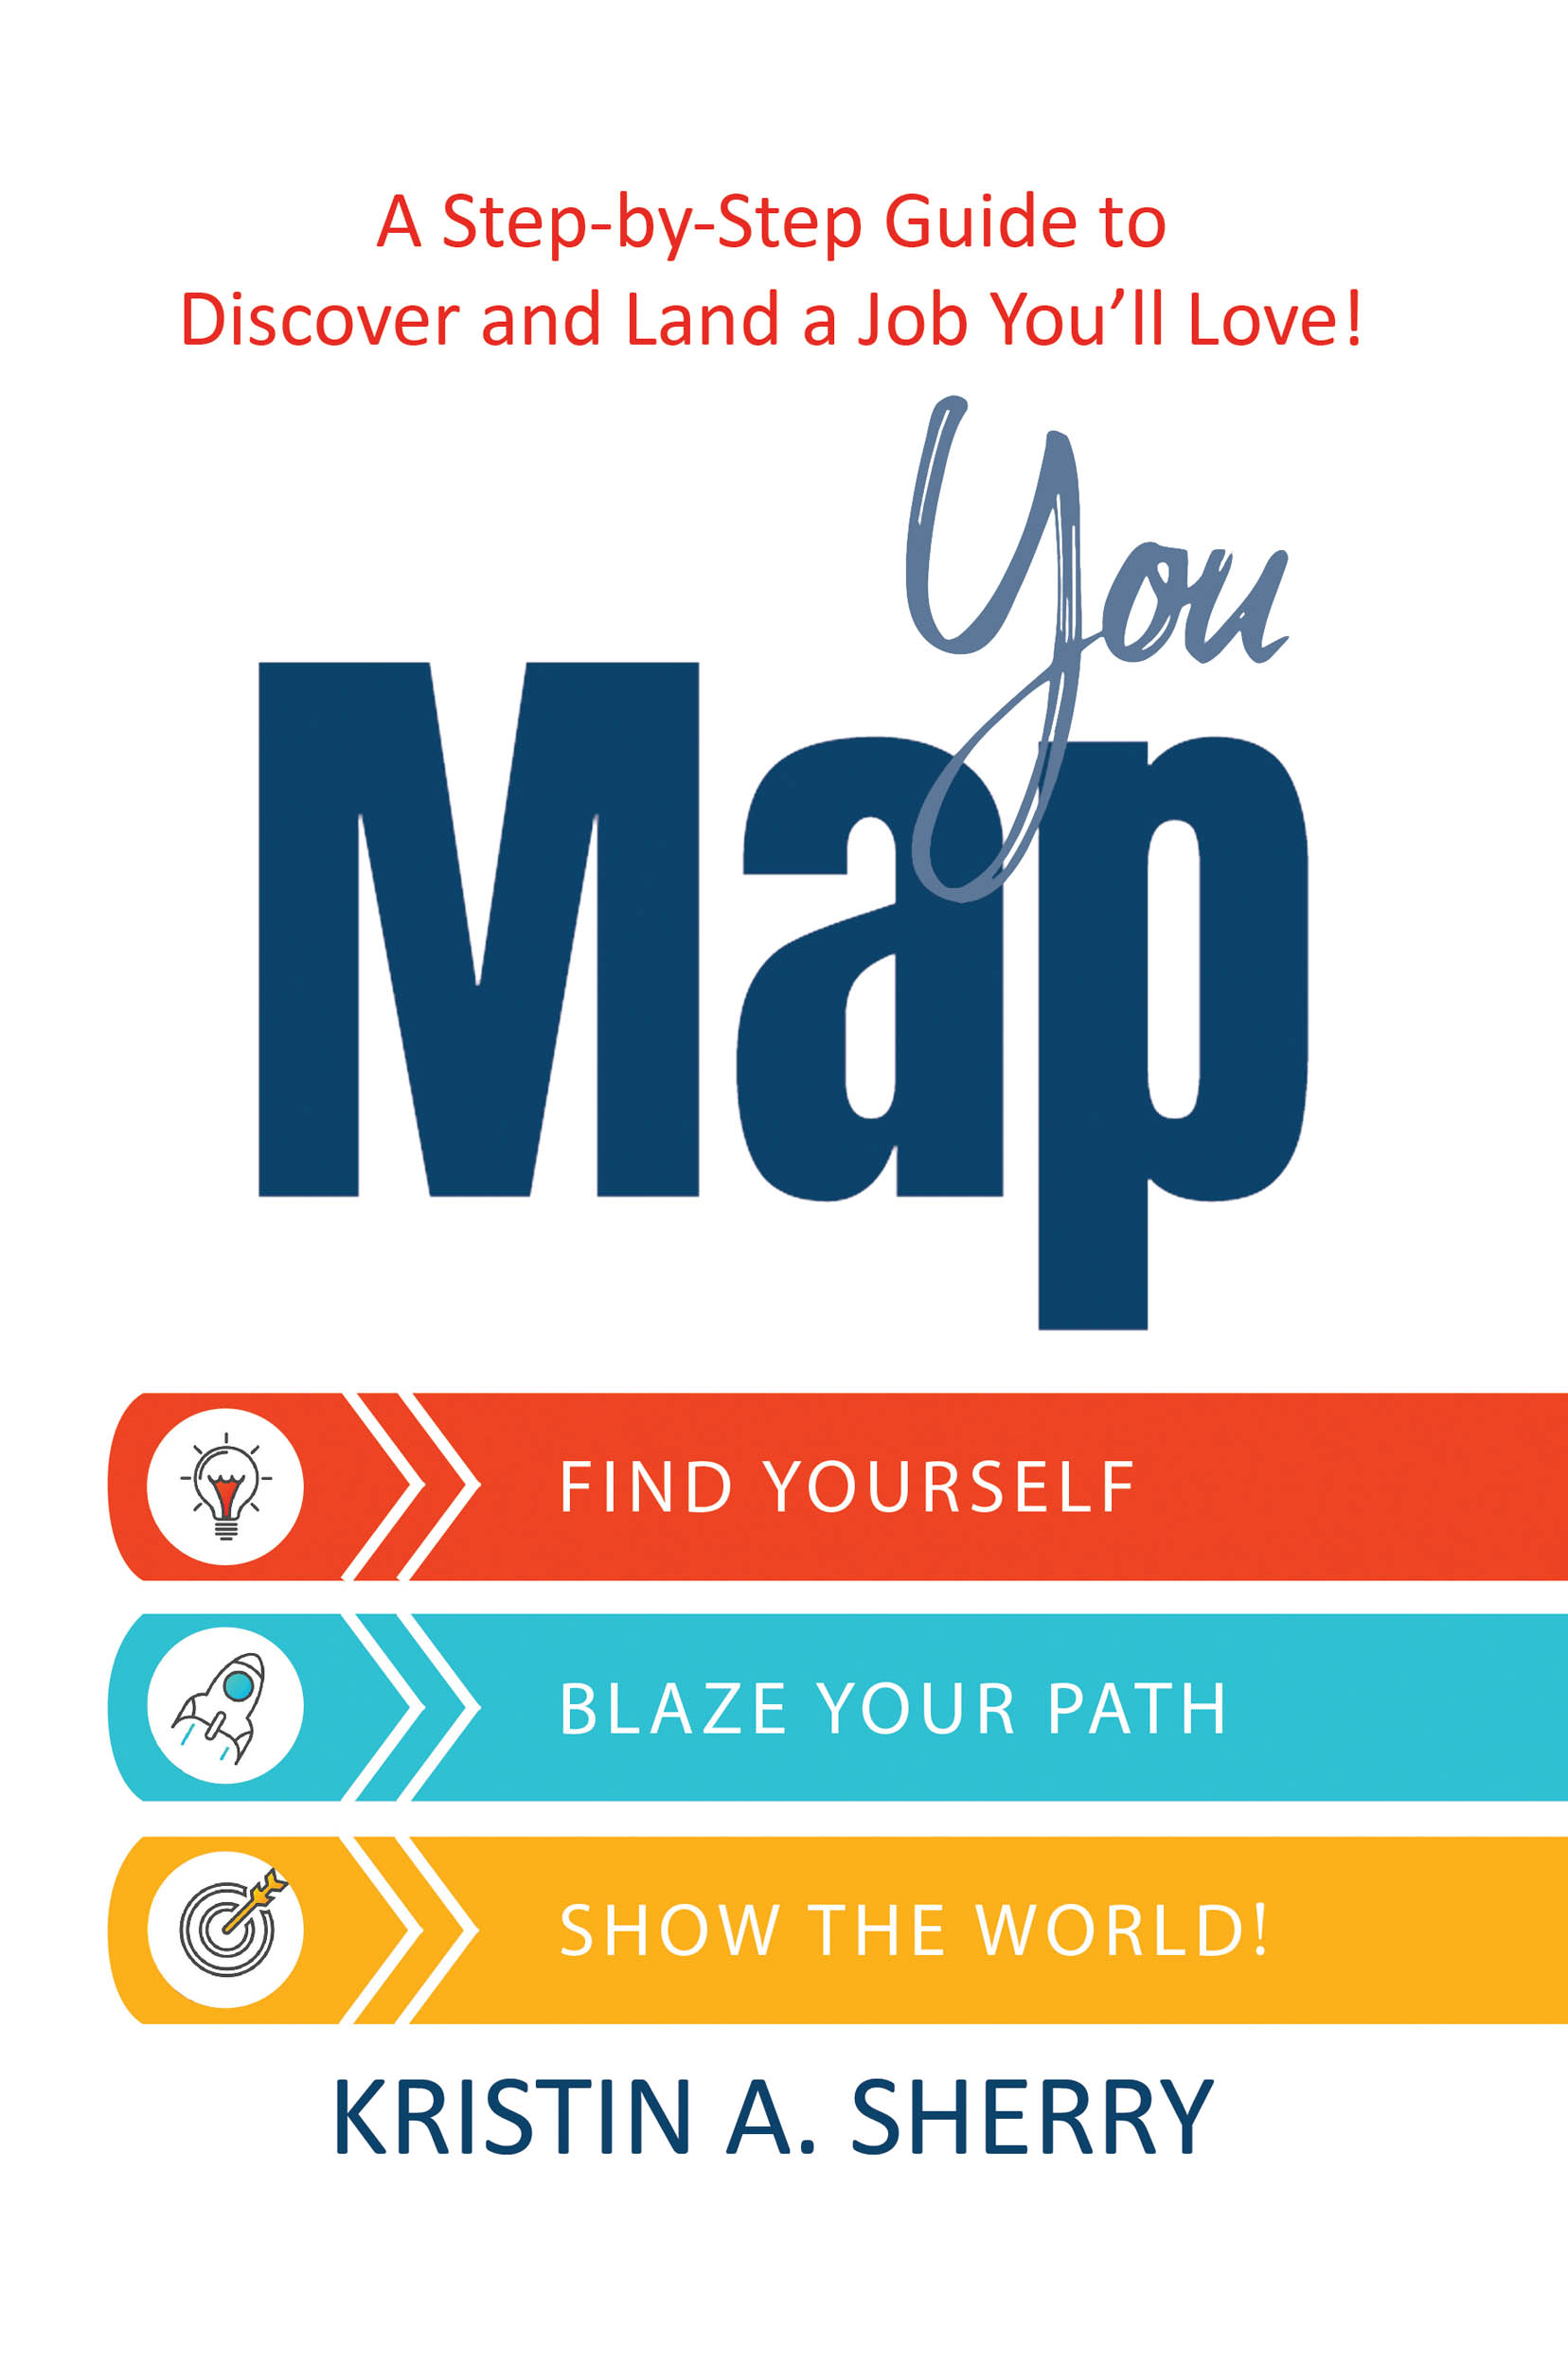 FREE: YouMap®: Find Yourself. Blaze Your Path. Show the World! by Kristin A. Sherry